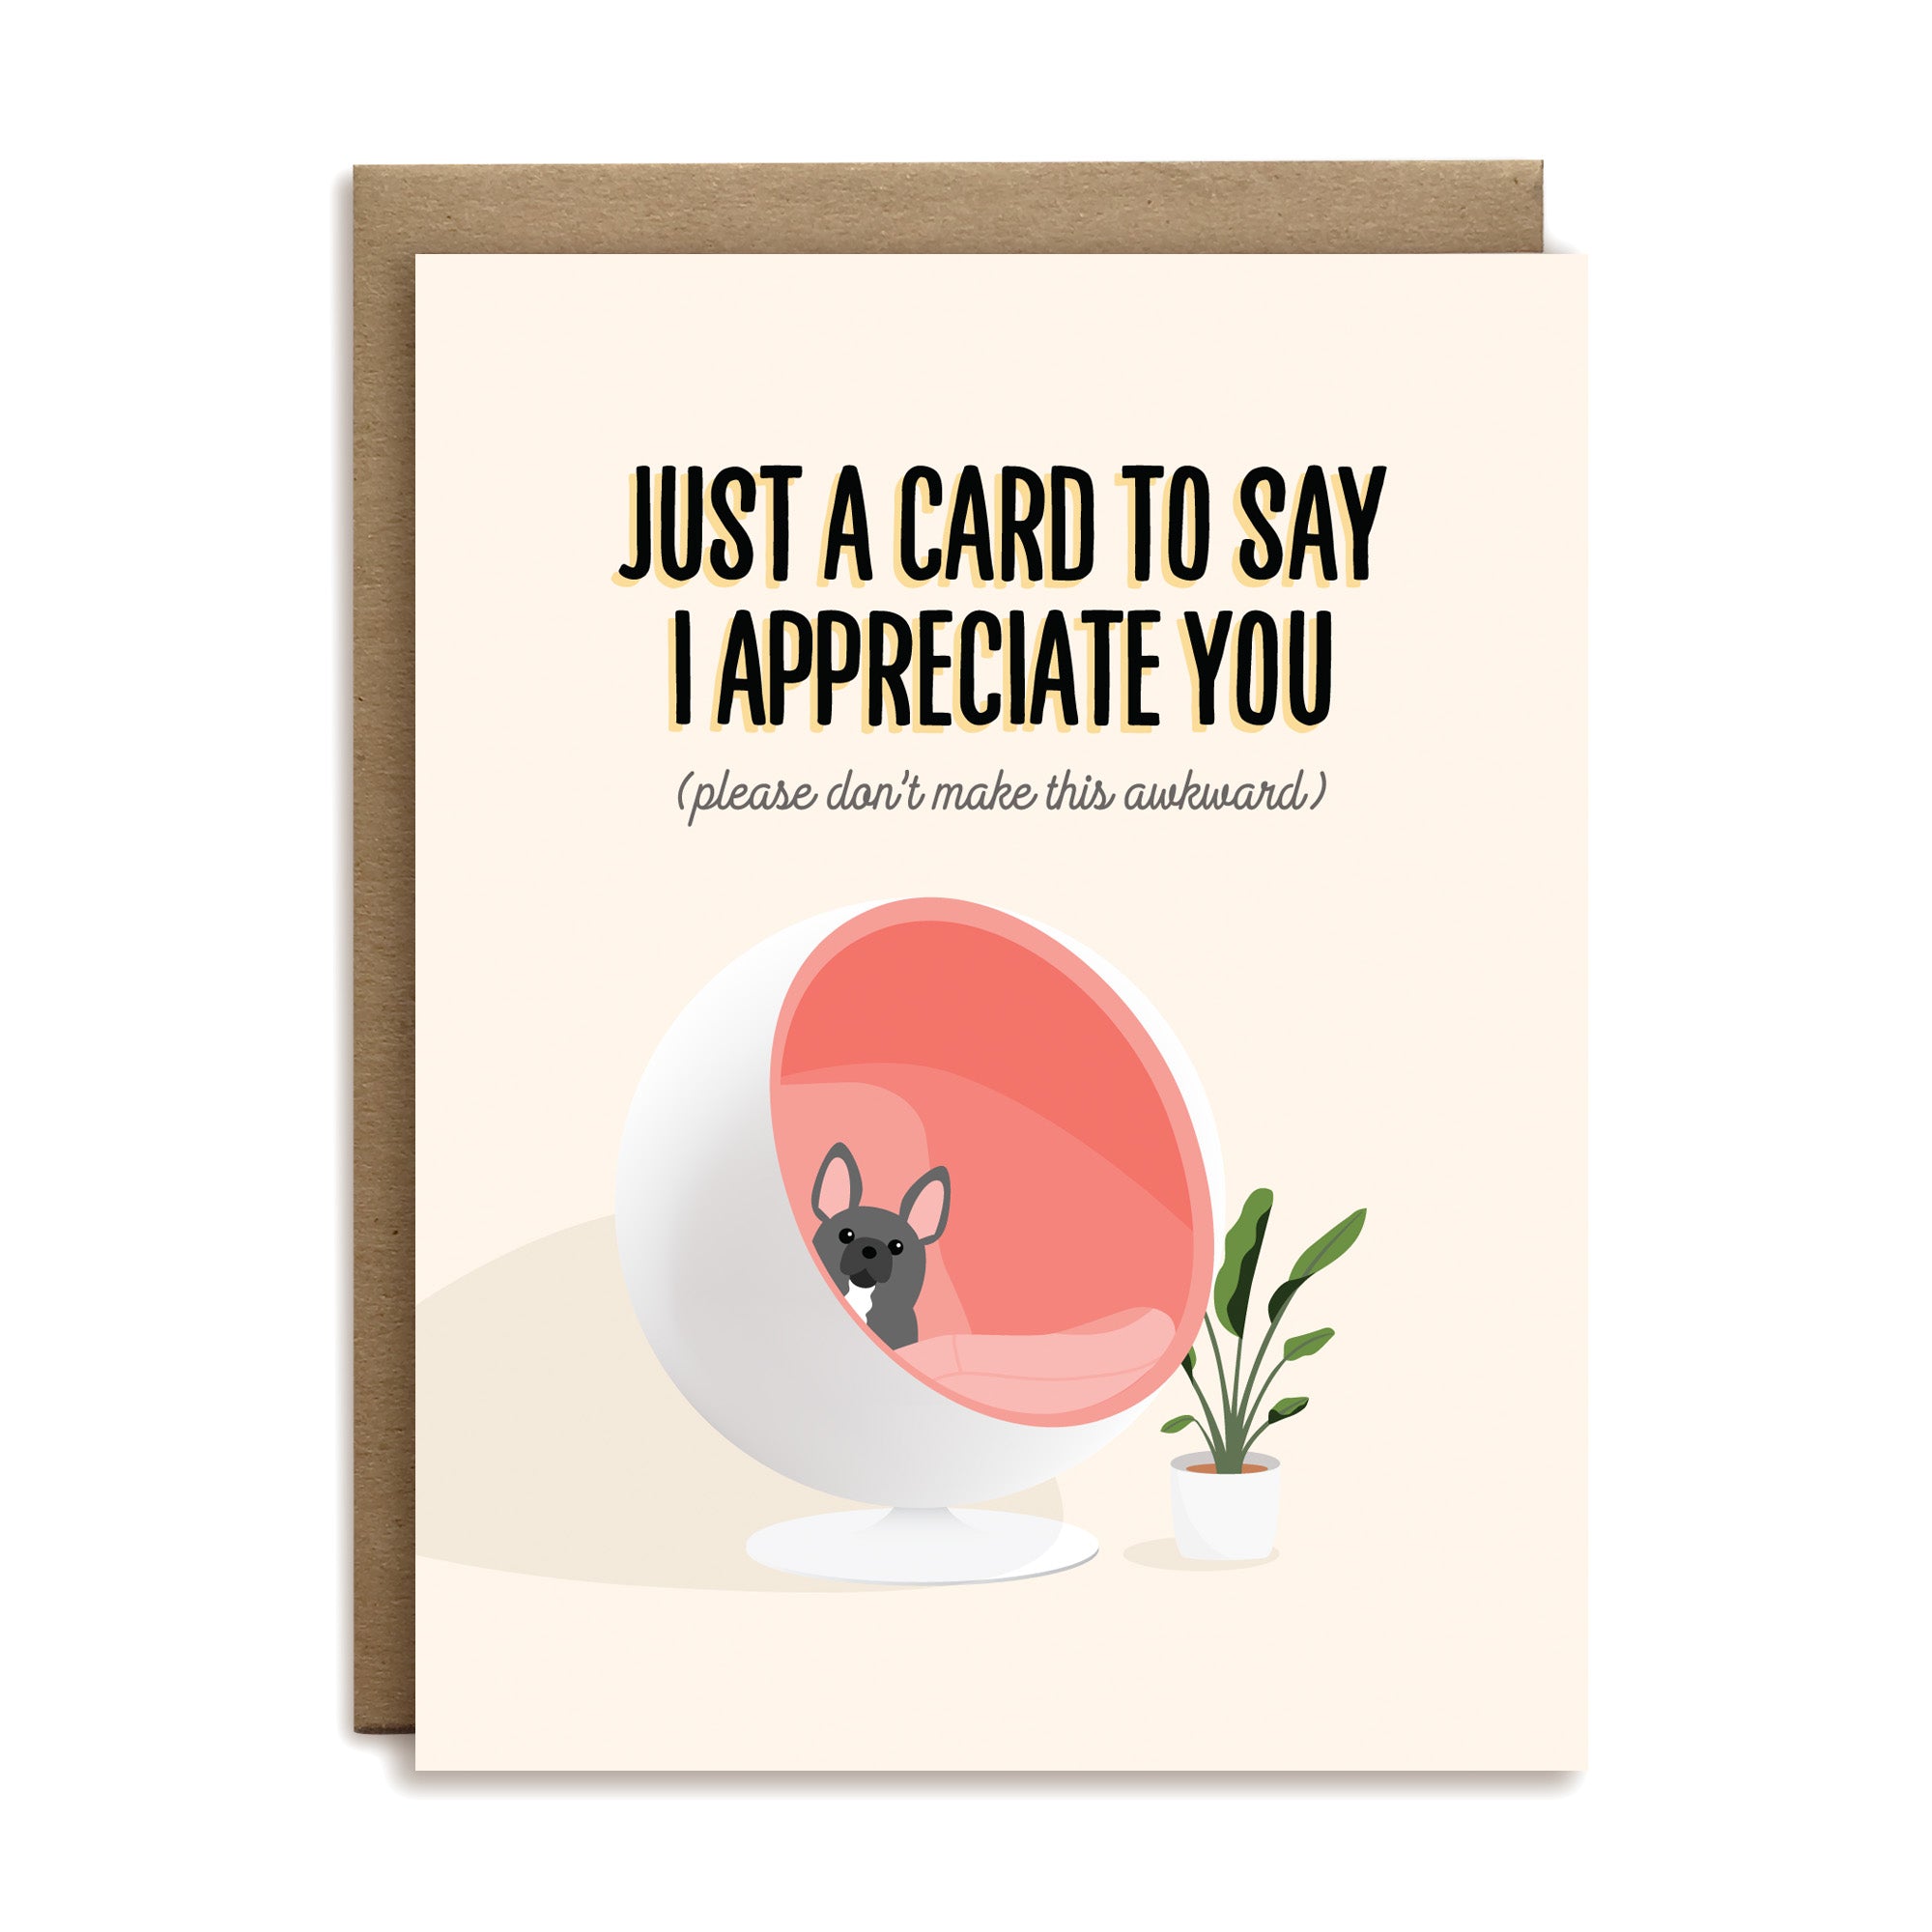 Just a card to say I appreciate you (please don&